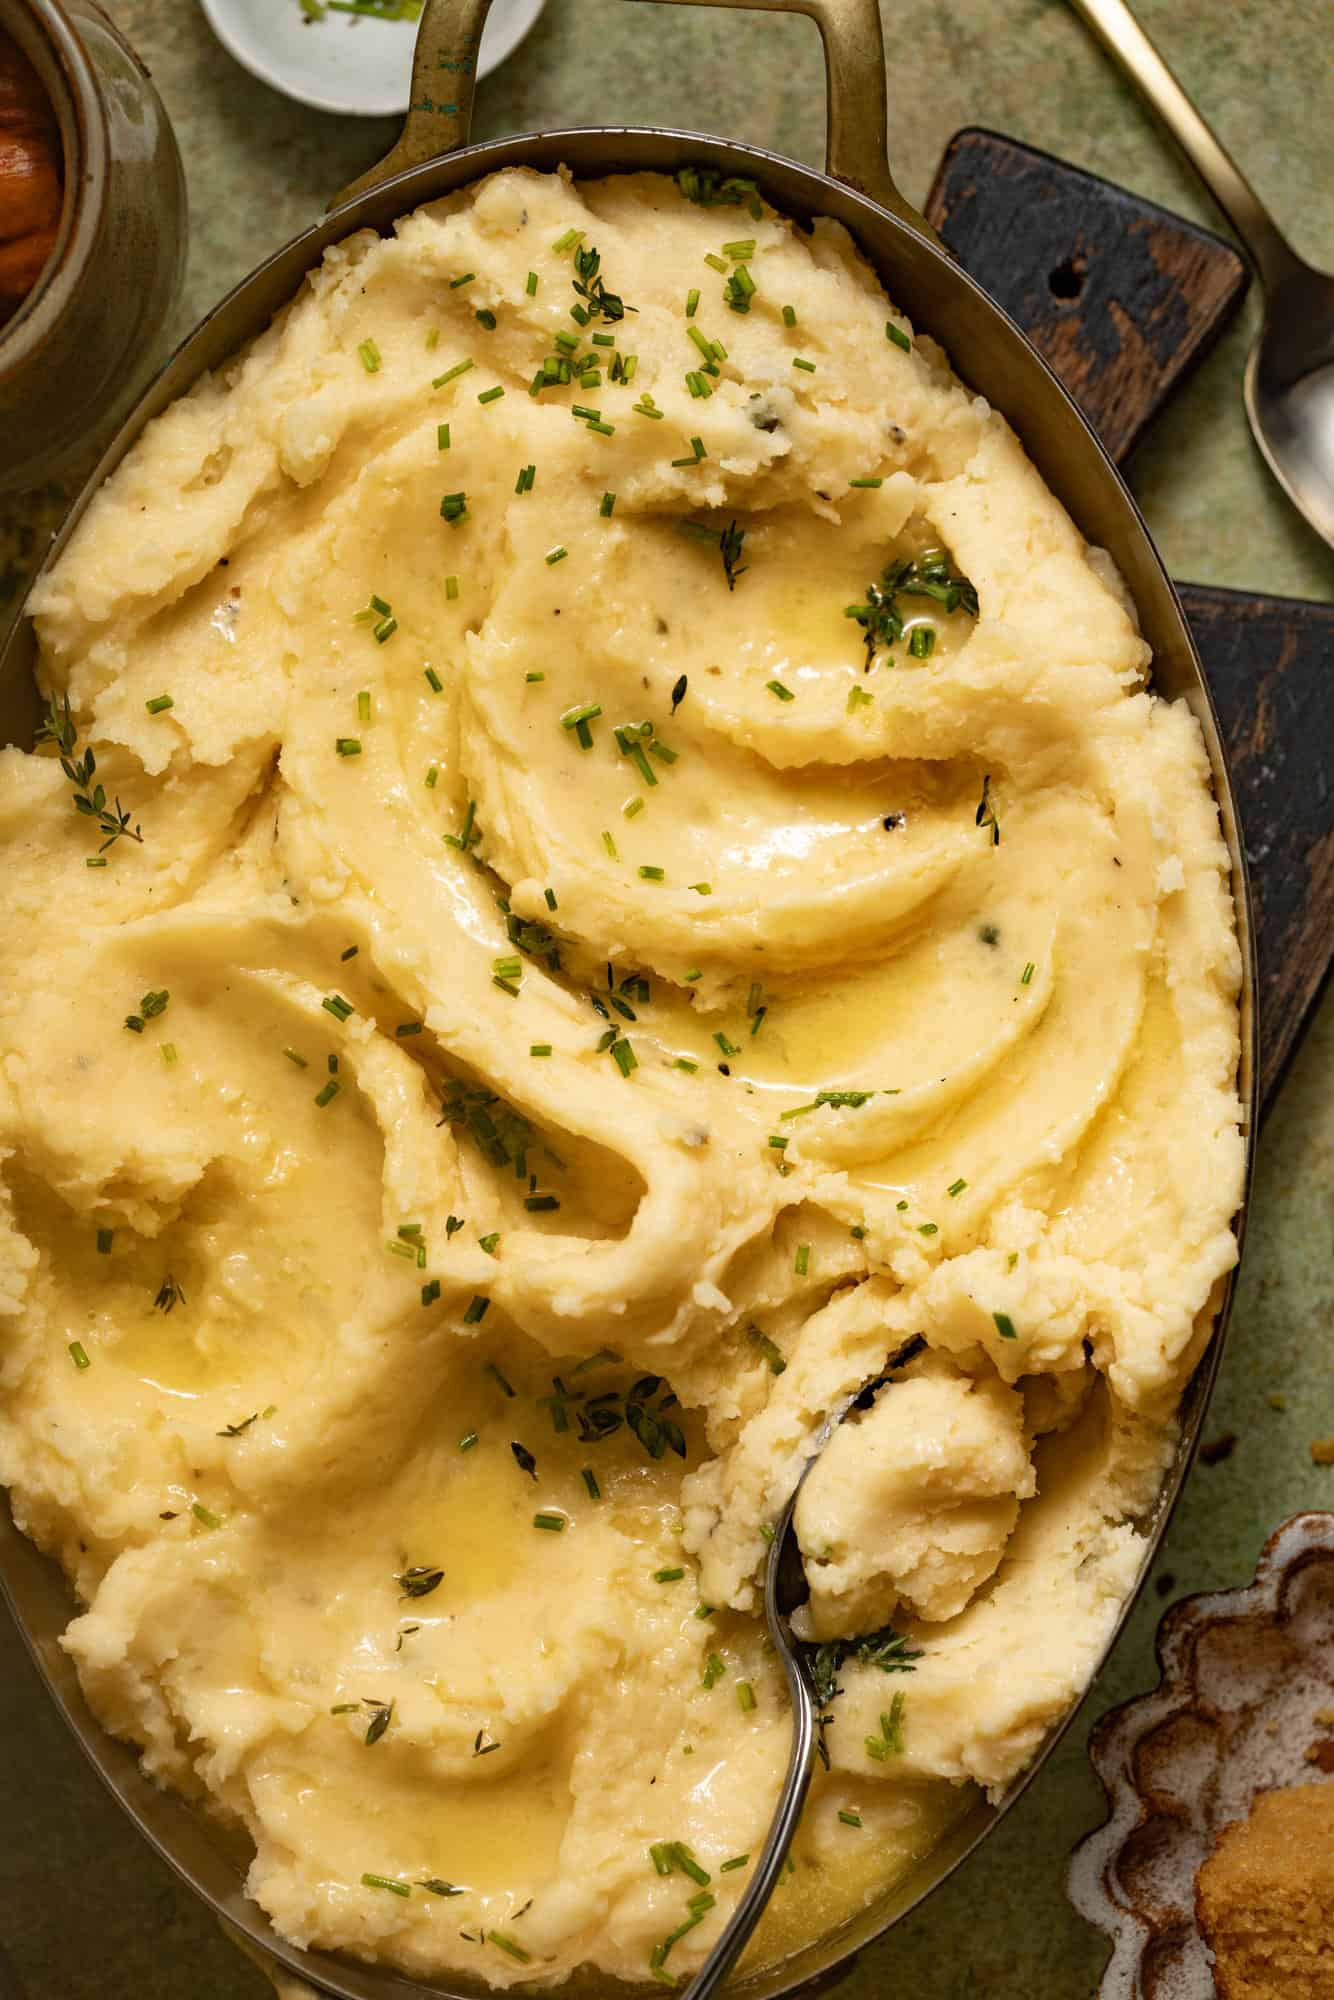 A spoon in a serving dish of cheesy mashed potatoes topped with butter.